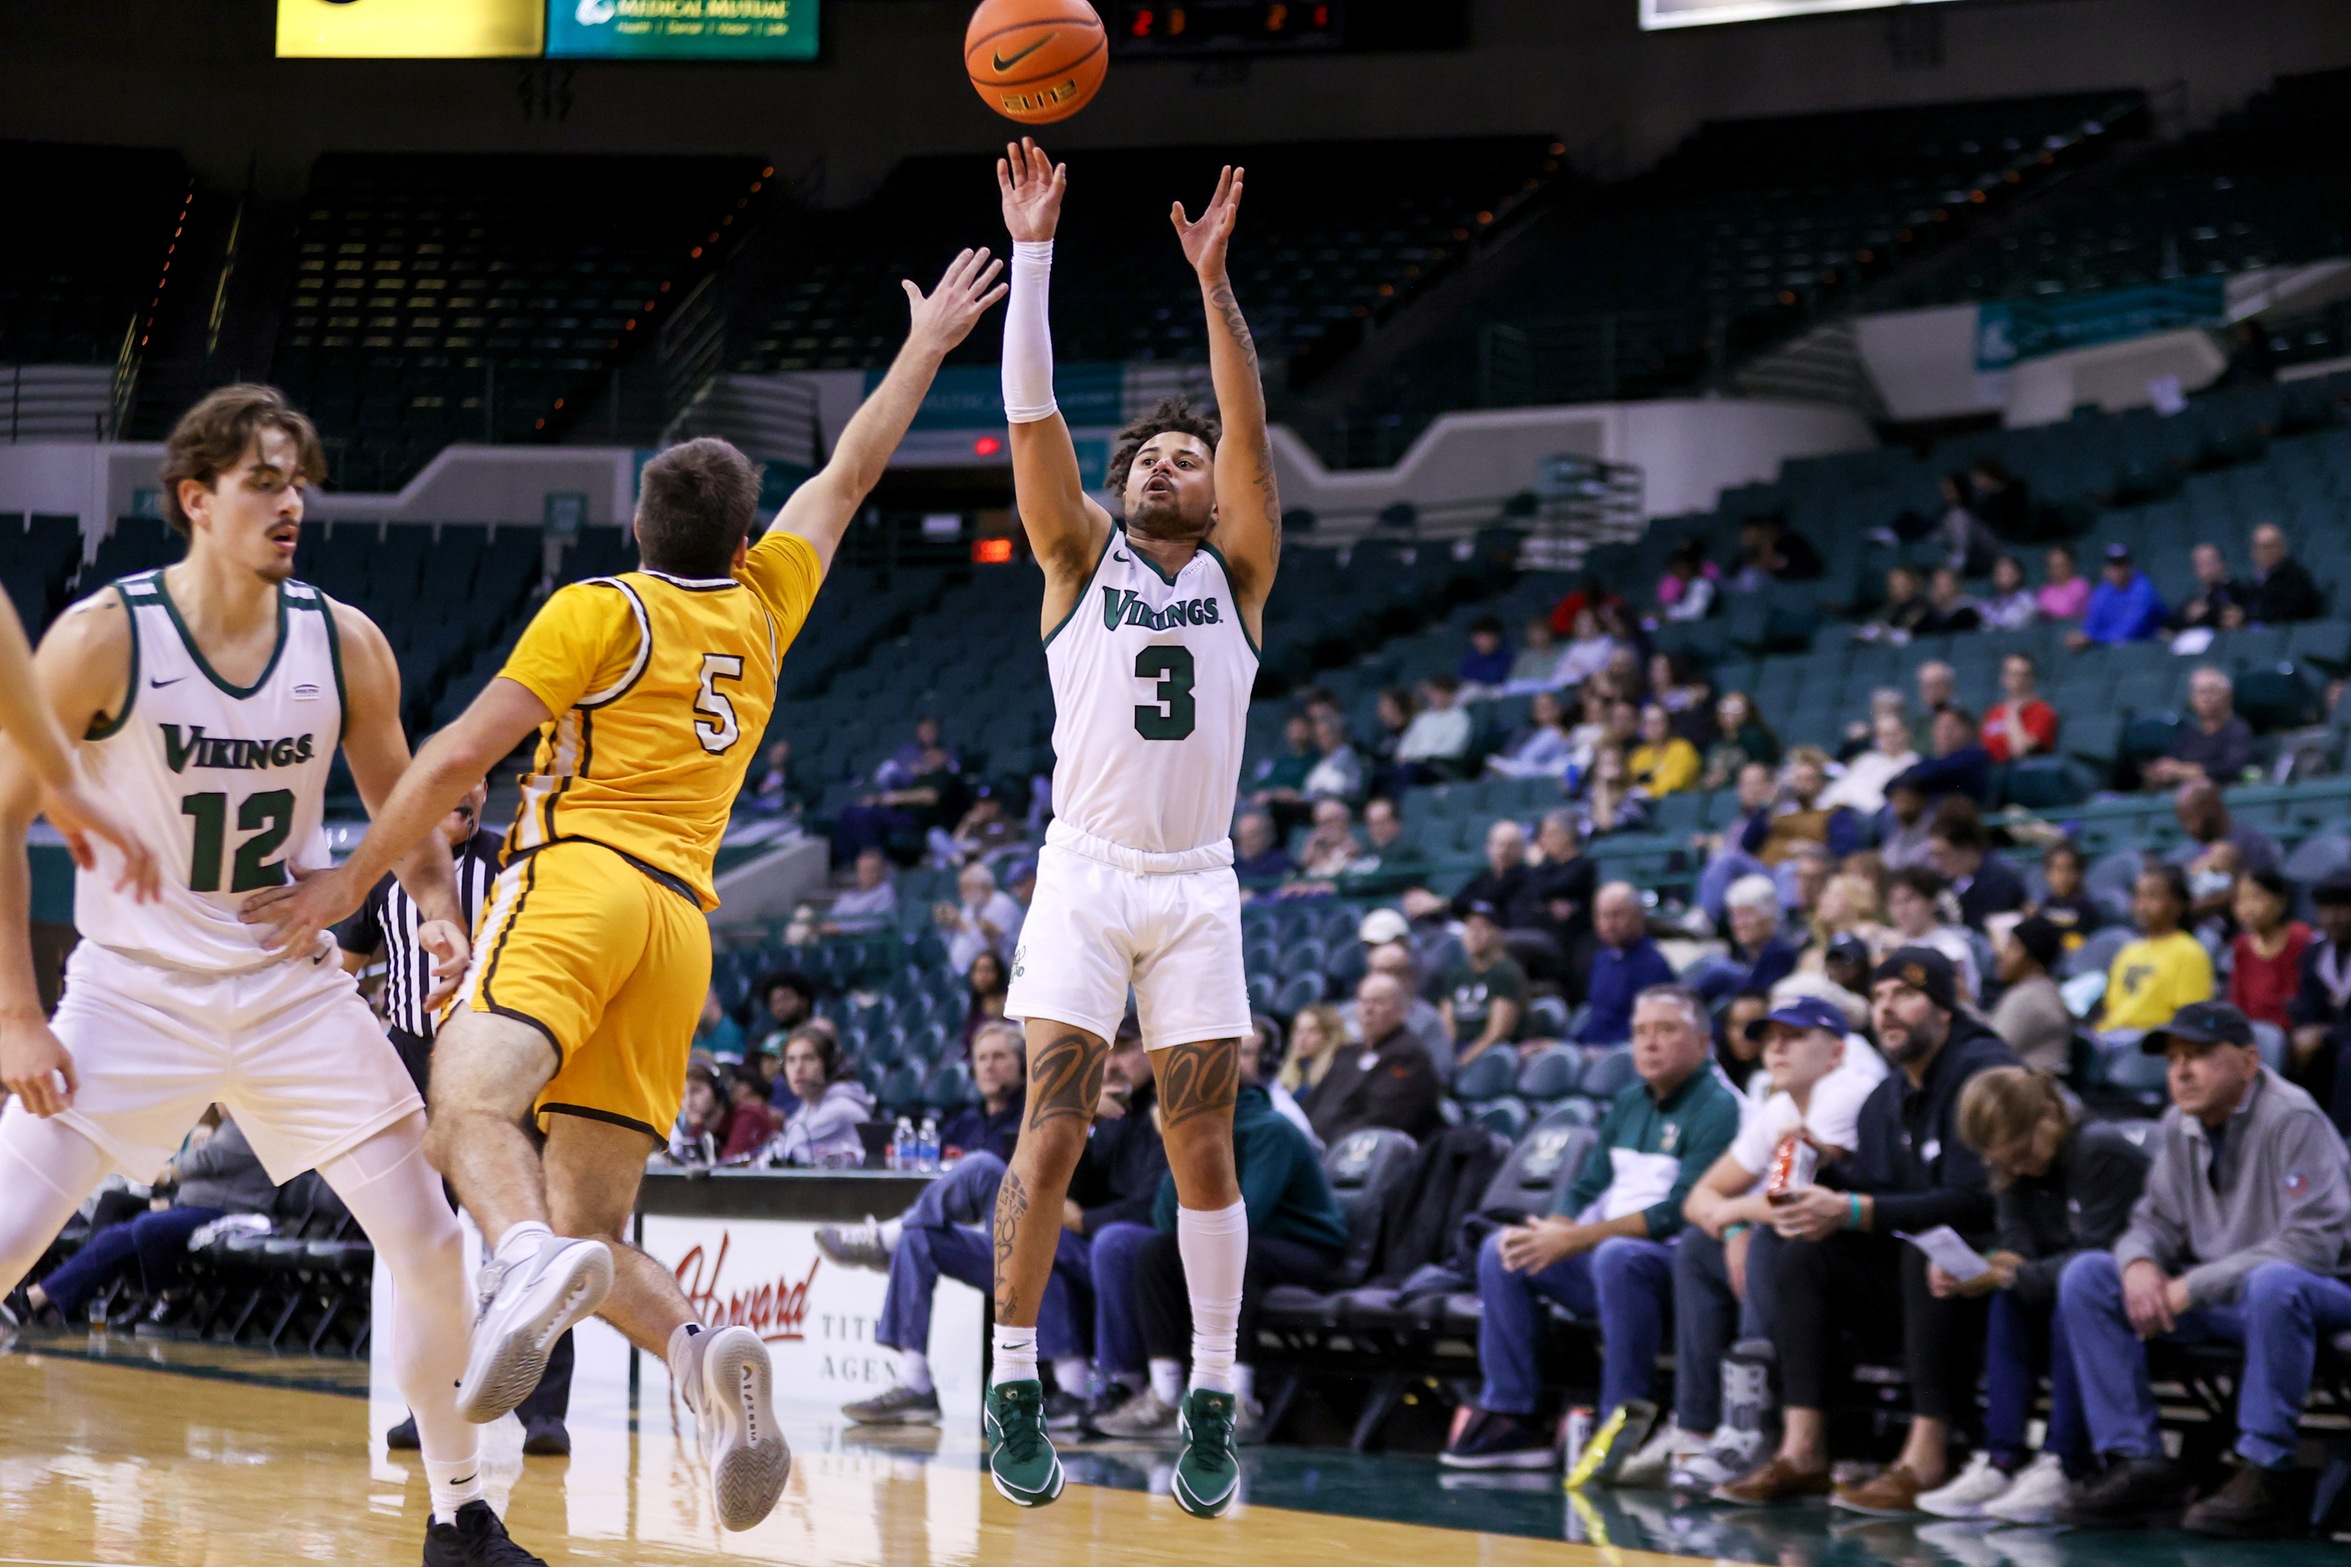 Cleveland State Men's Basketball Opens Regular Season With Monday Night Matchup at Duquesne